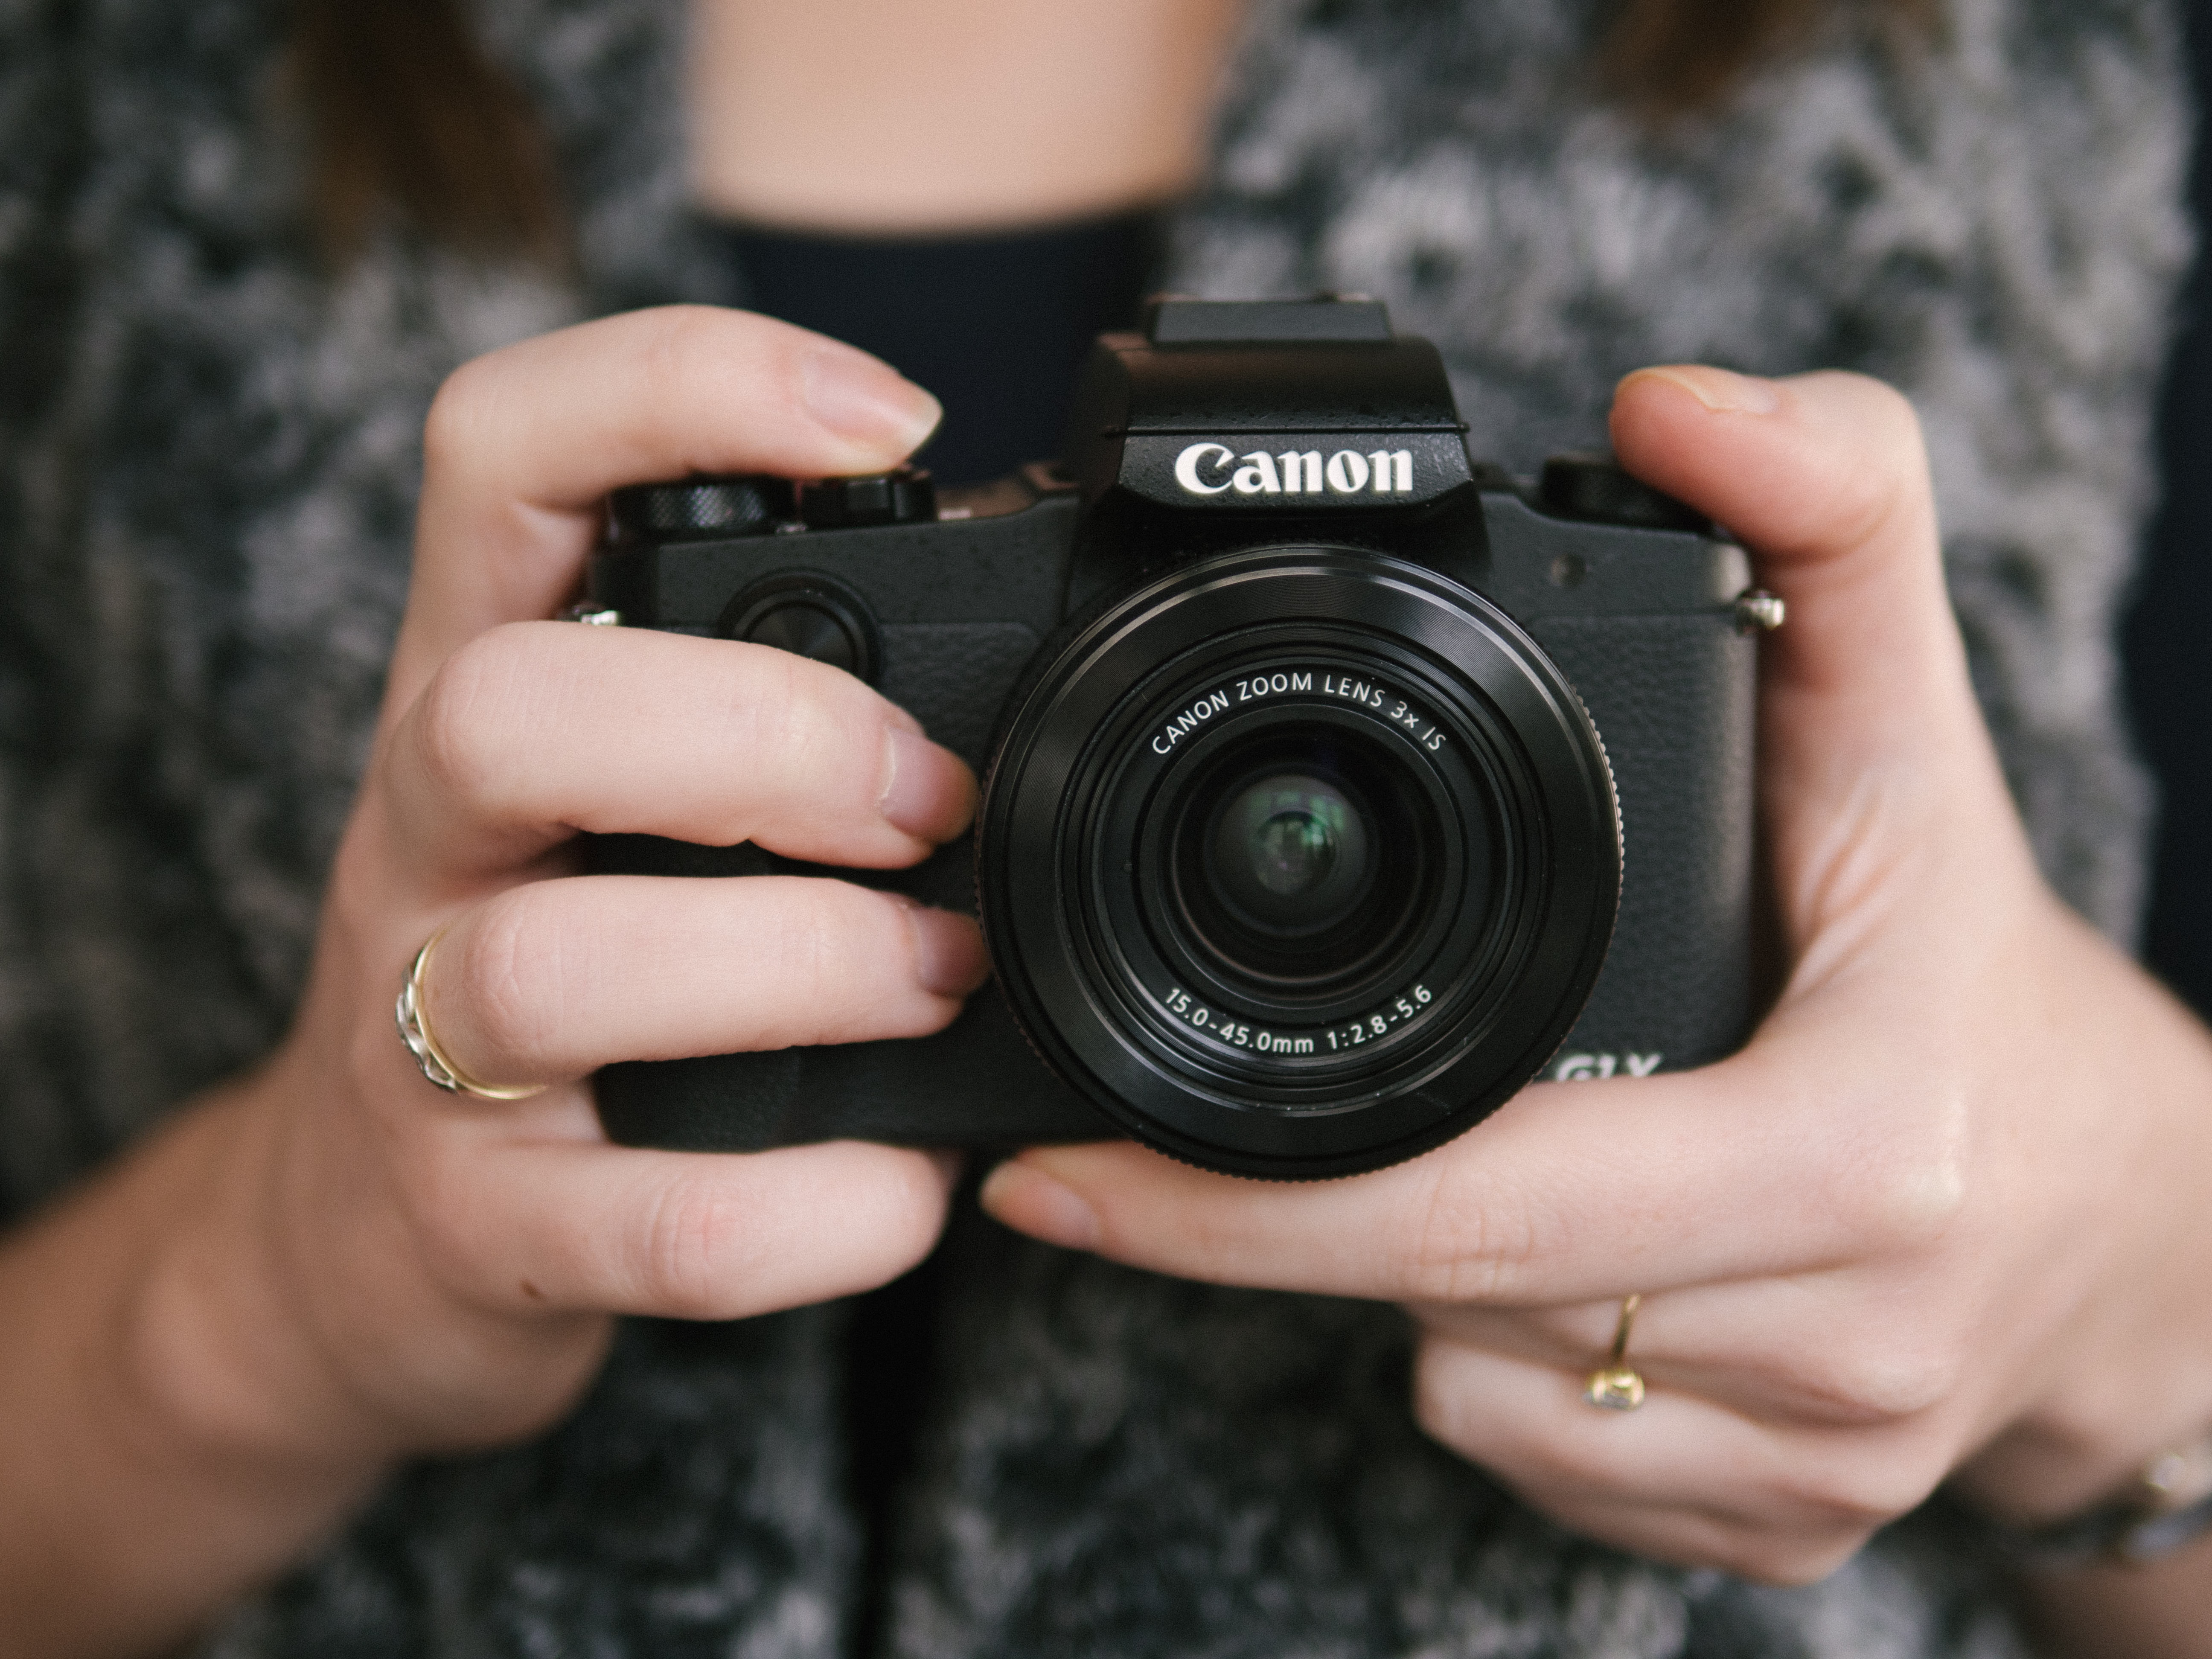 Tech Review: Can Compact Camera Like a We Test Canon's Powershot G1 X Mark - The AU Review